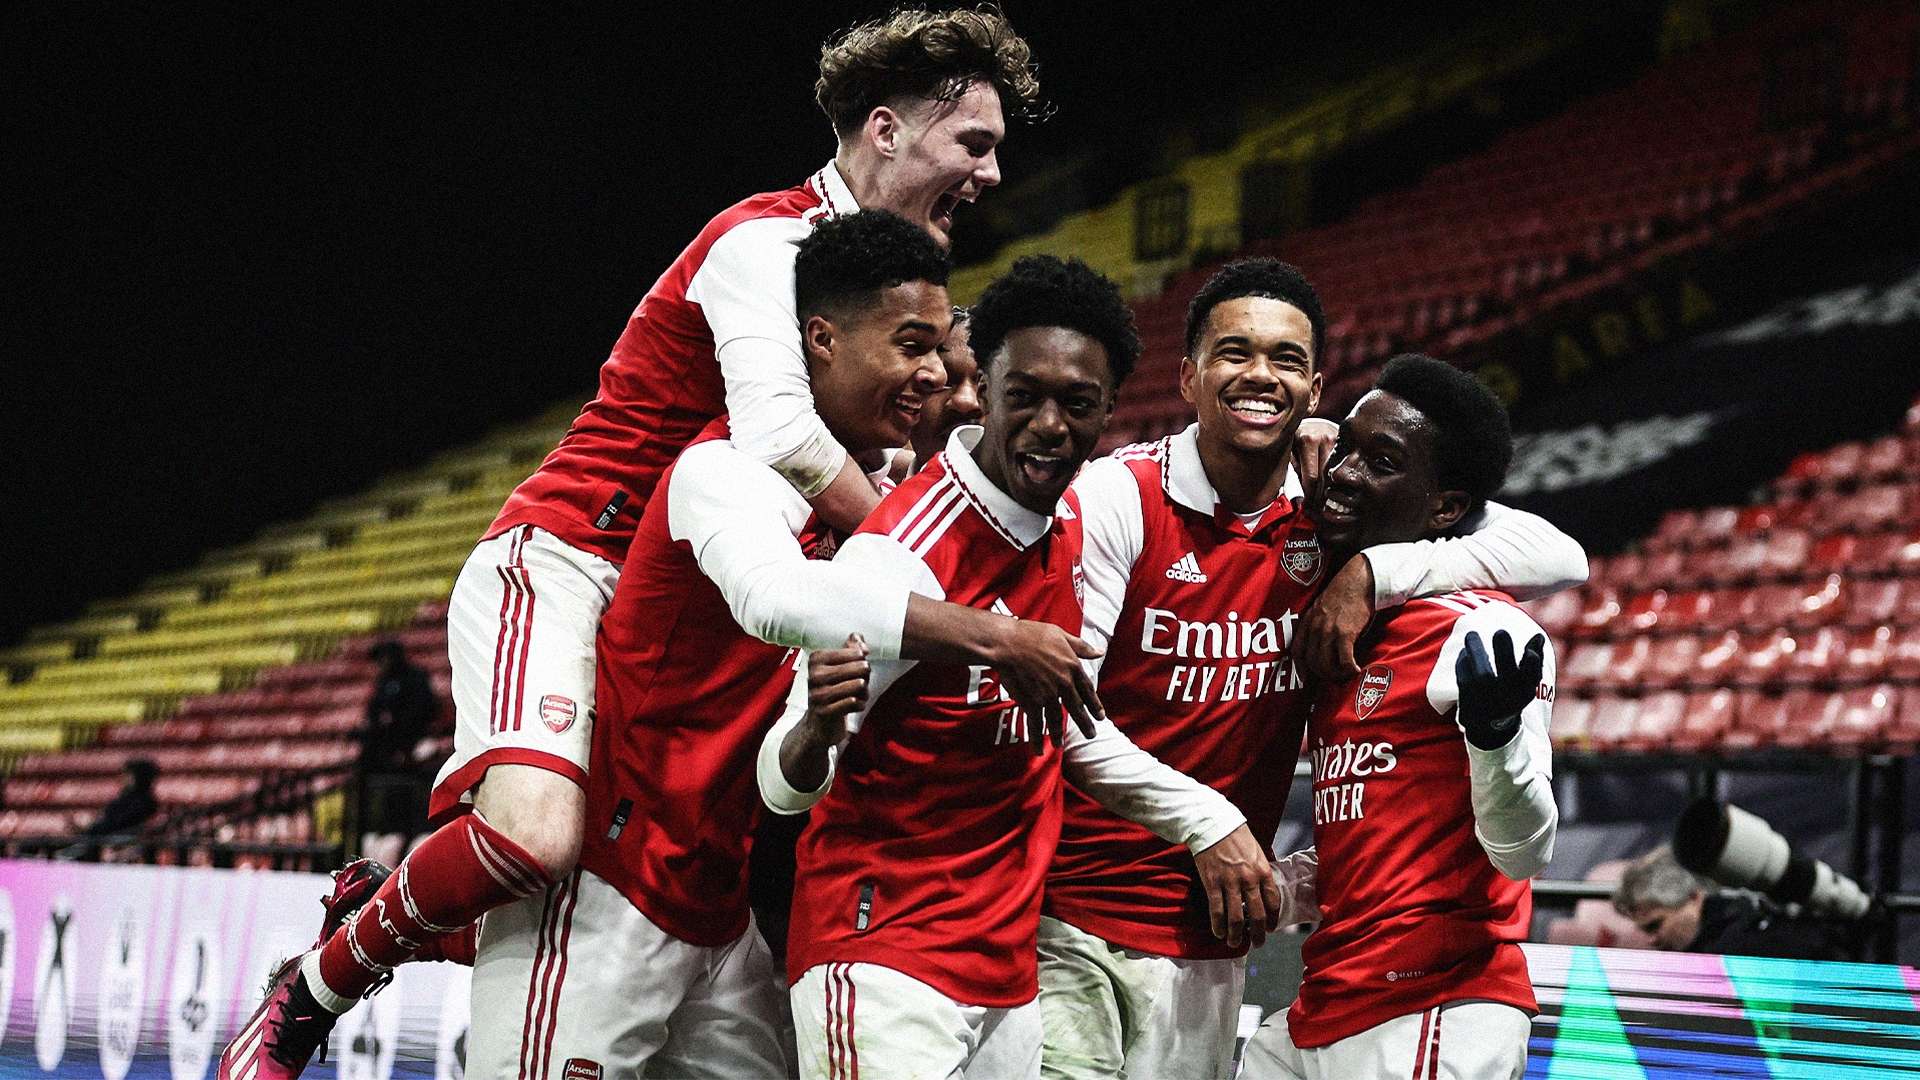 Arsenal FA Youth Cup 2023 HIC 16:9